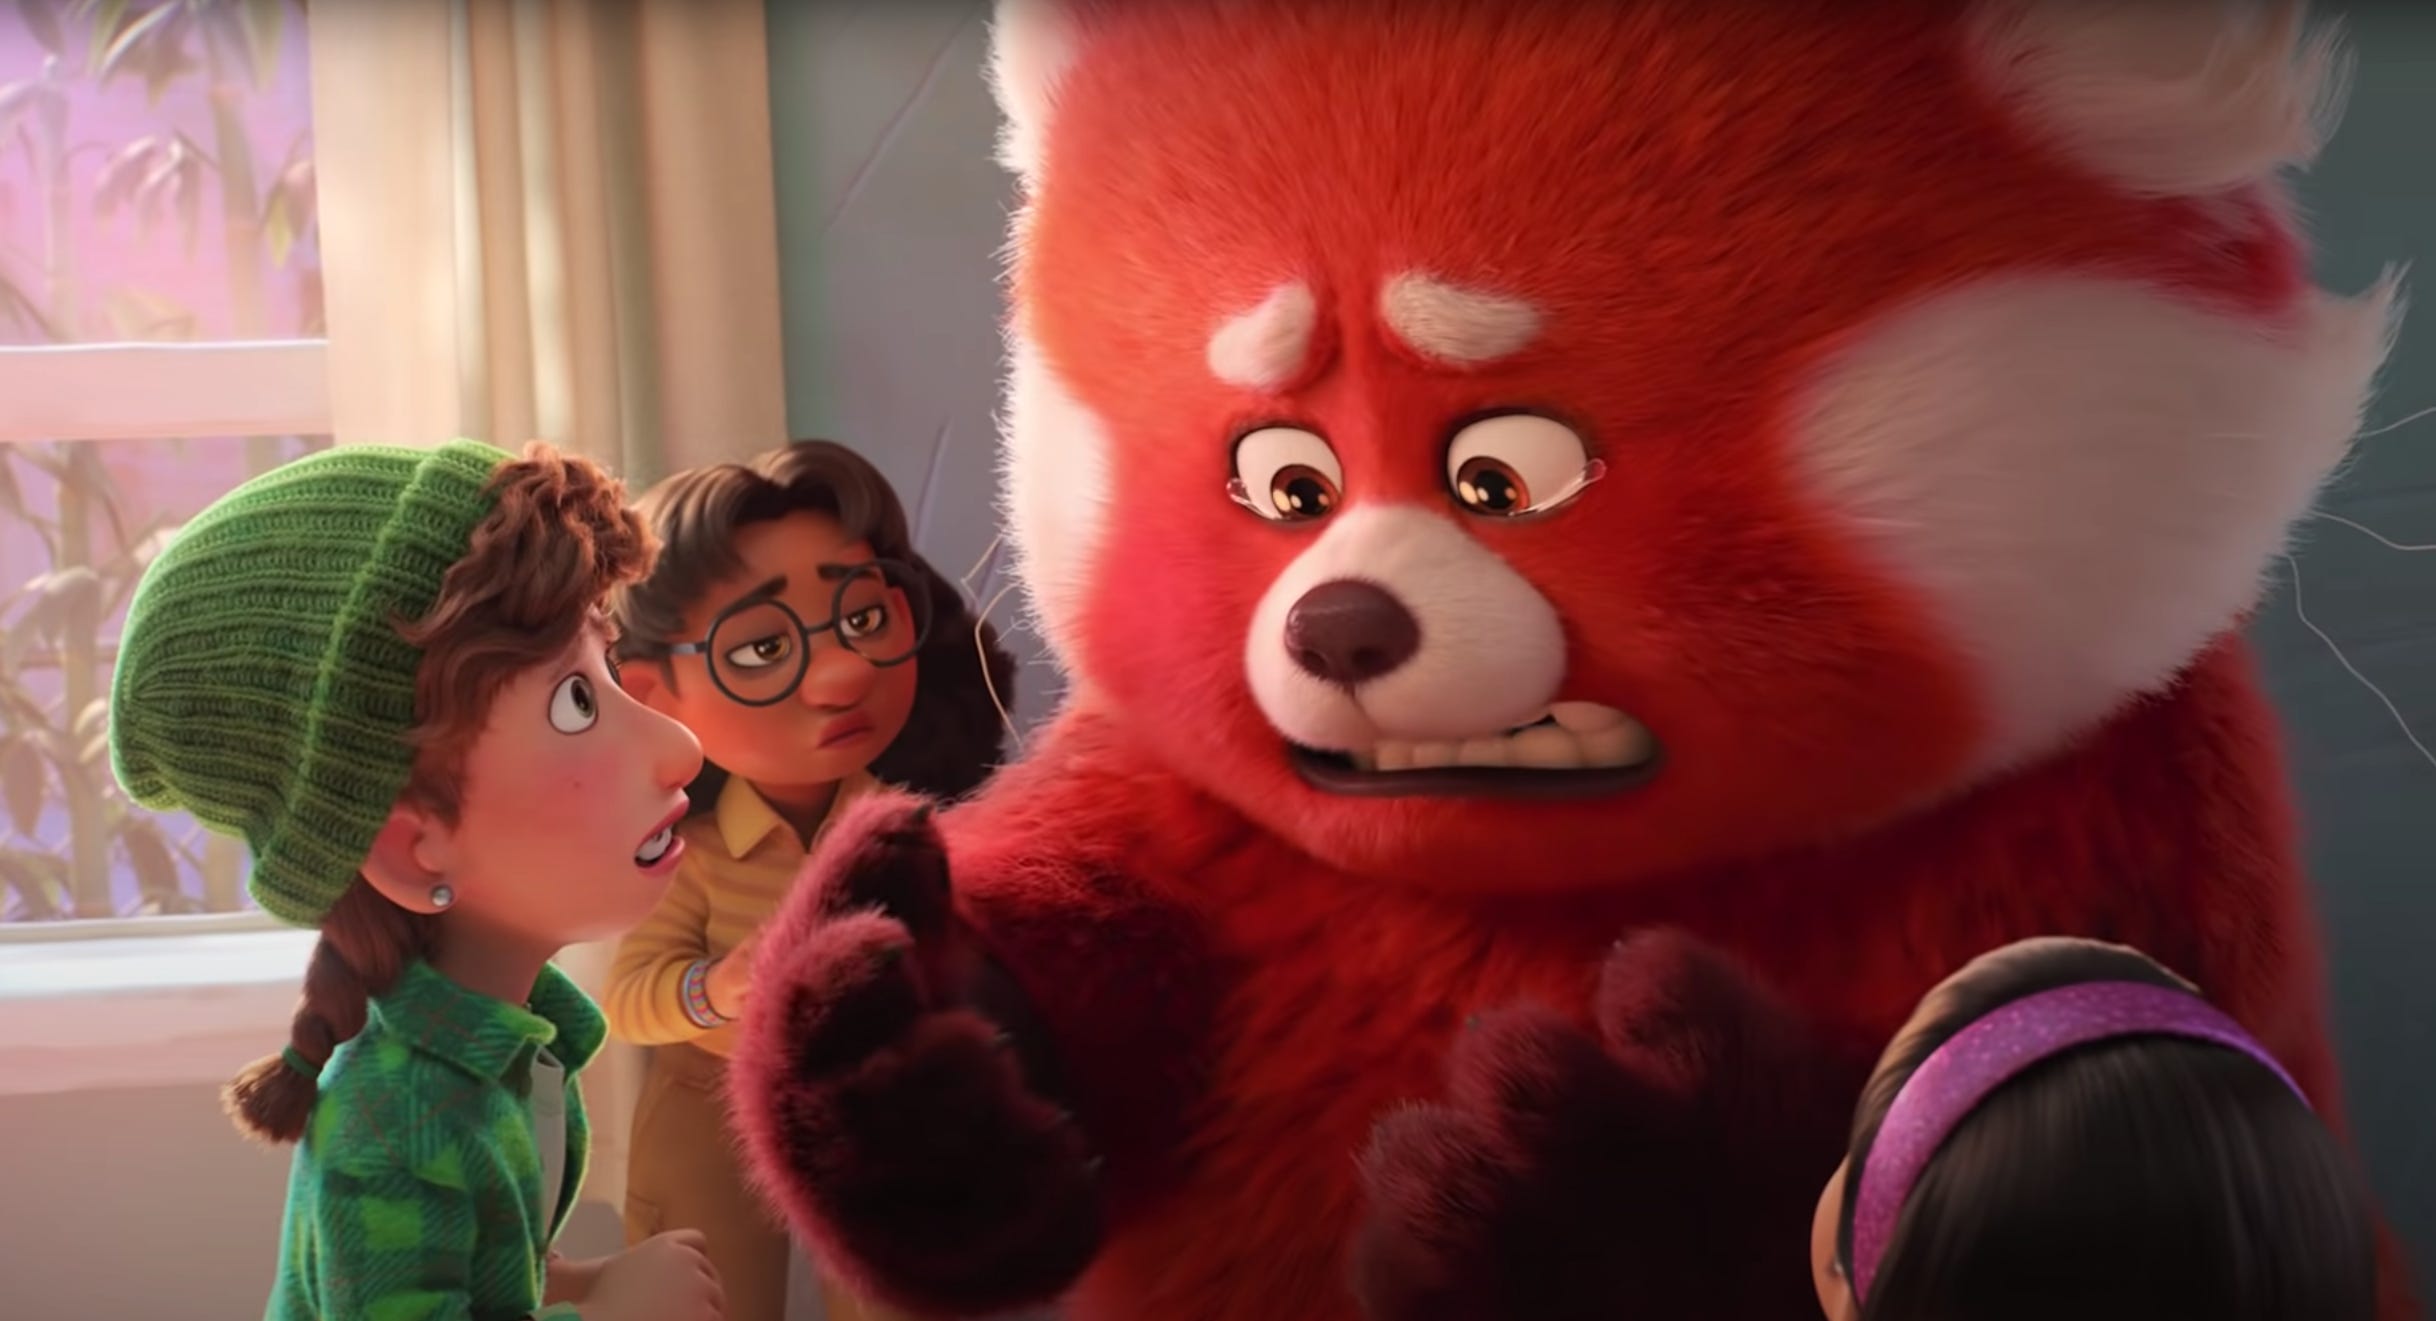 Mei's friends discover she's turning into a giant red panda in "Turning Red." <a>Disney/Pixar</a>